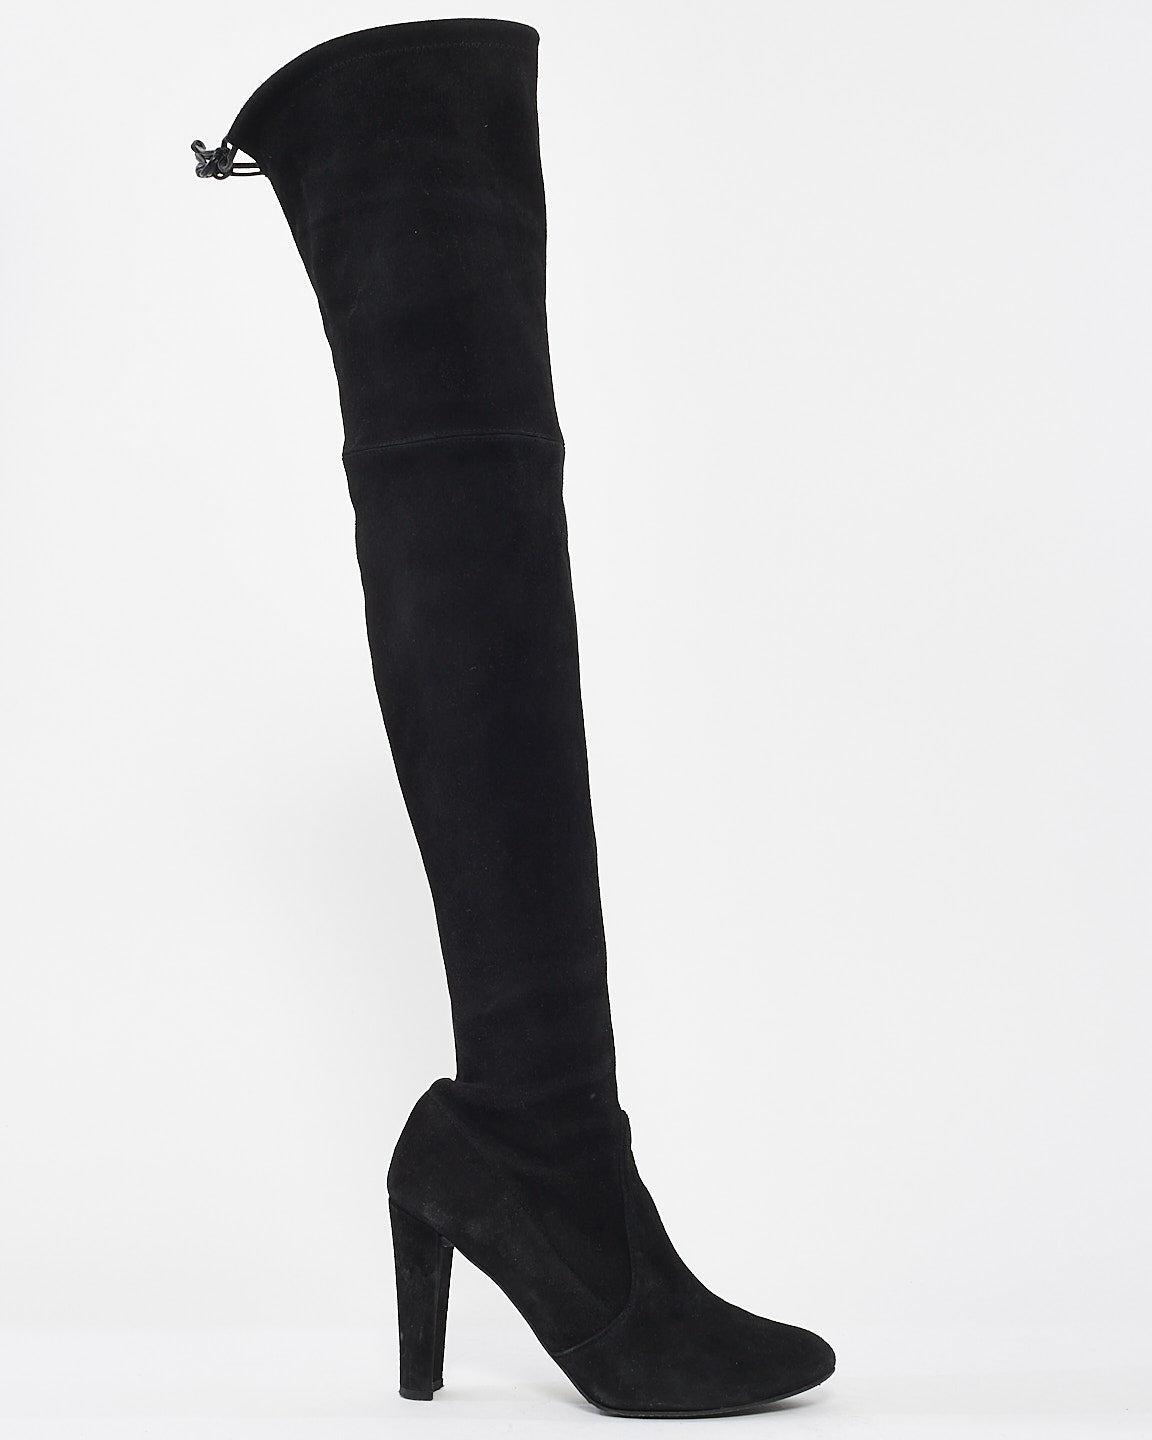 Stuart Weitzman Black Suede Highland Stretch Suede Over-The-Knee Boots - 7